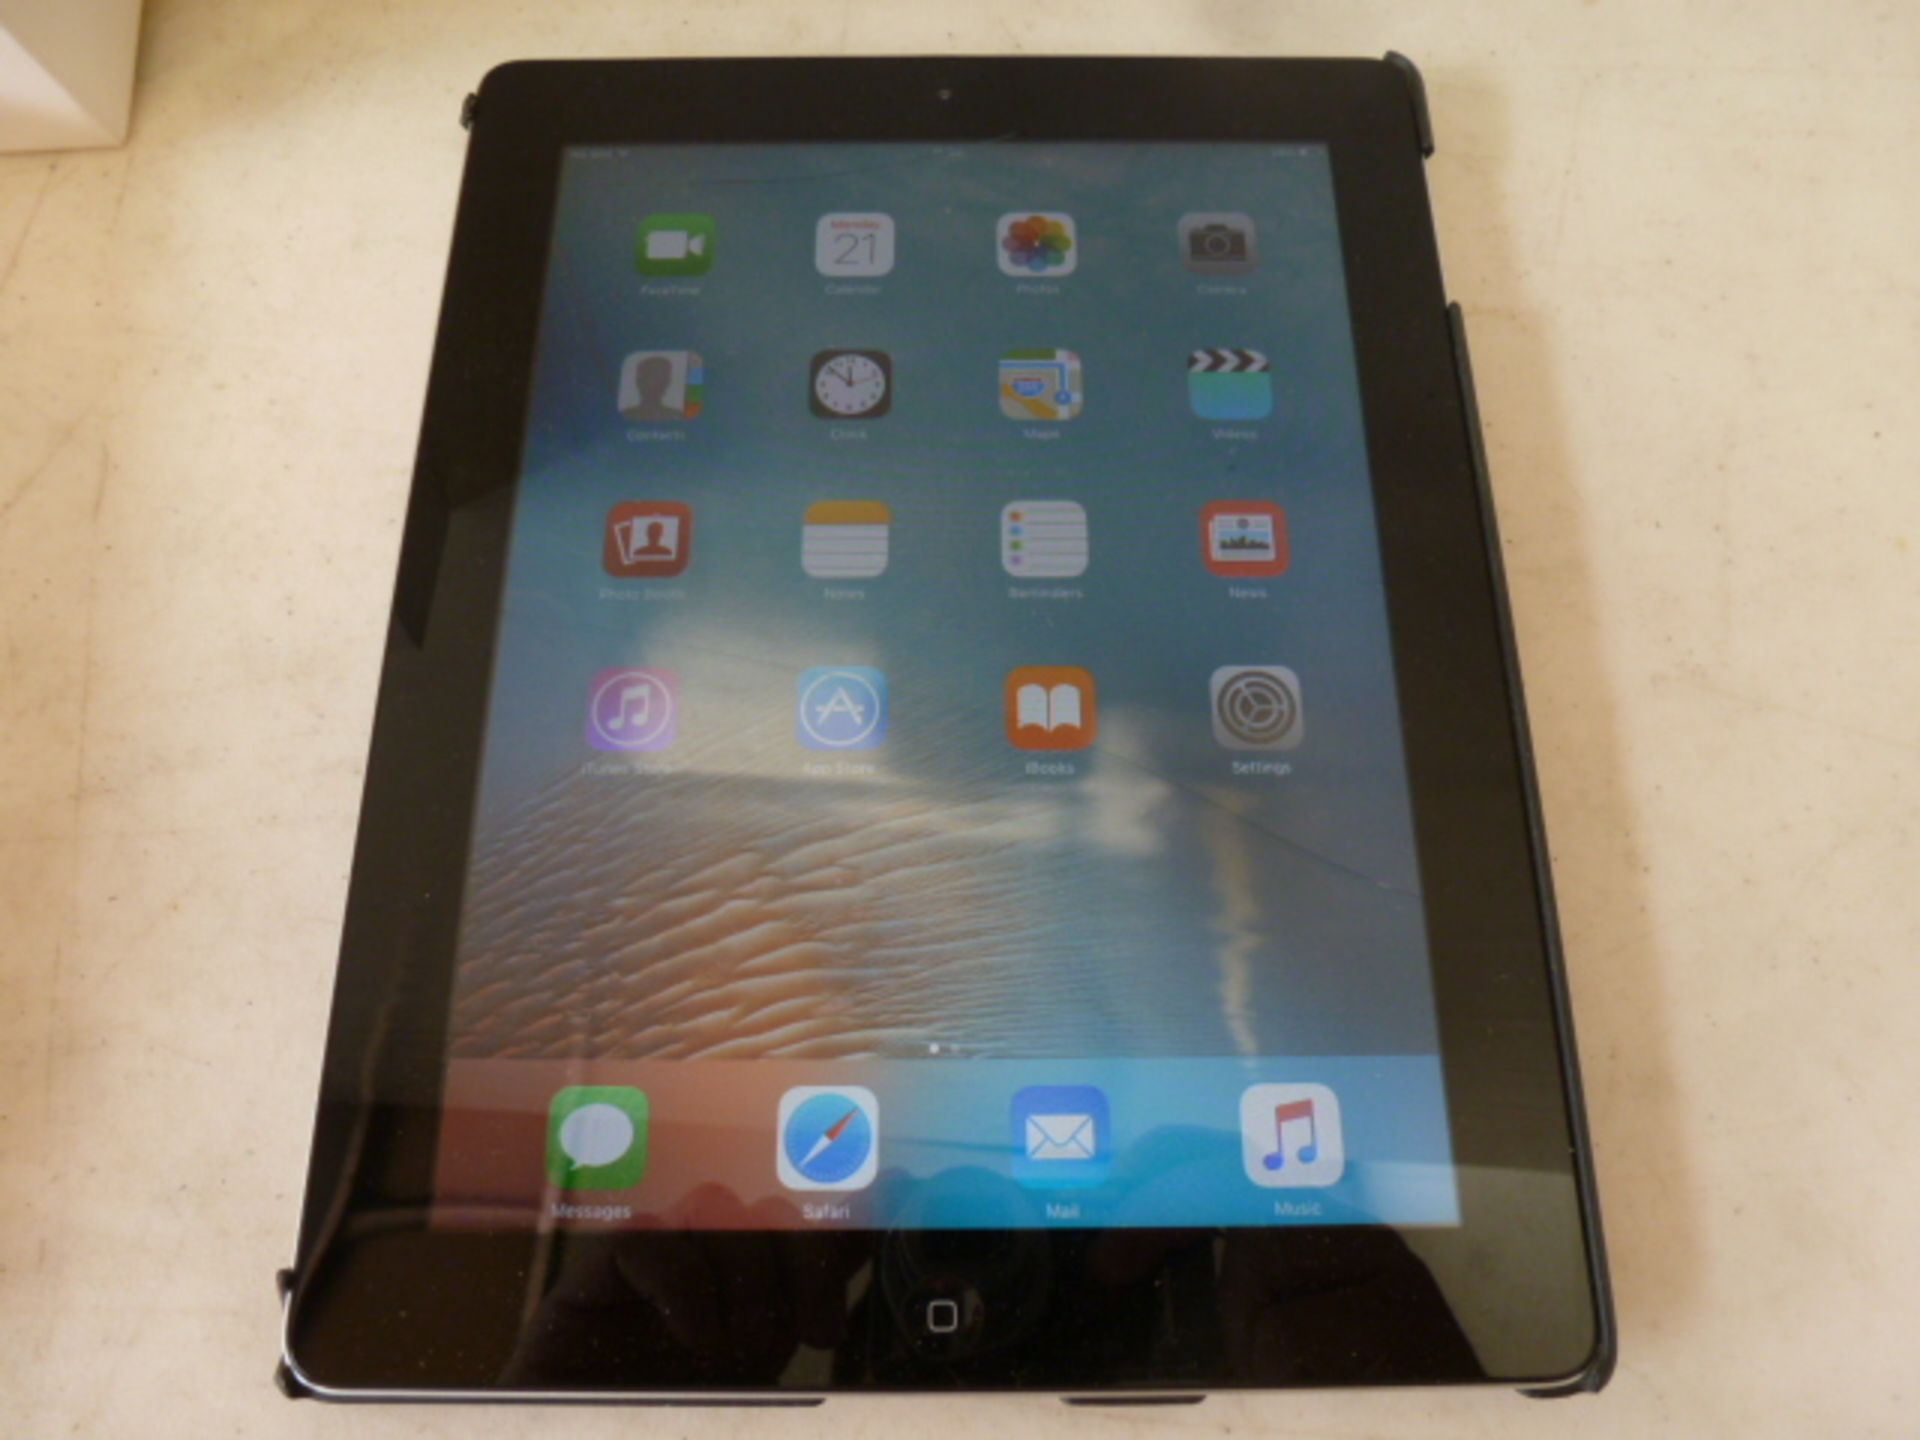 Ipad 2 Model A1396, Wi-Fi 3G, 32GB. Comes with Box & Charger. (Slight Damage to Screen as Viewed/ - Image 2 of 4